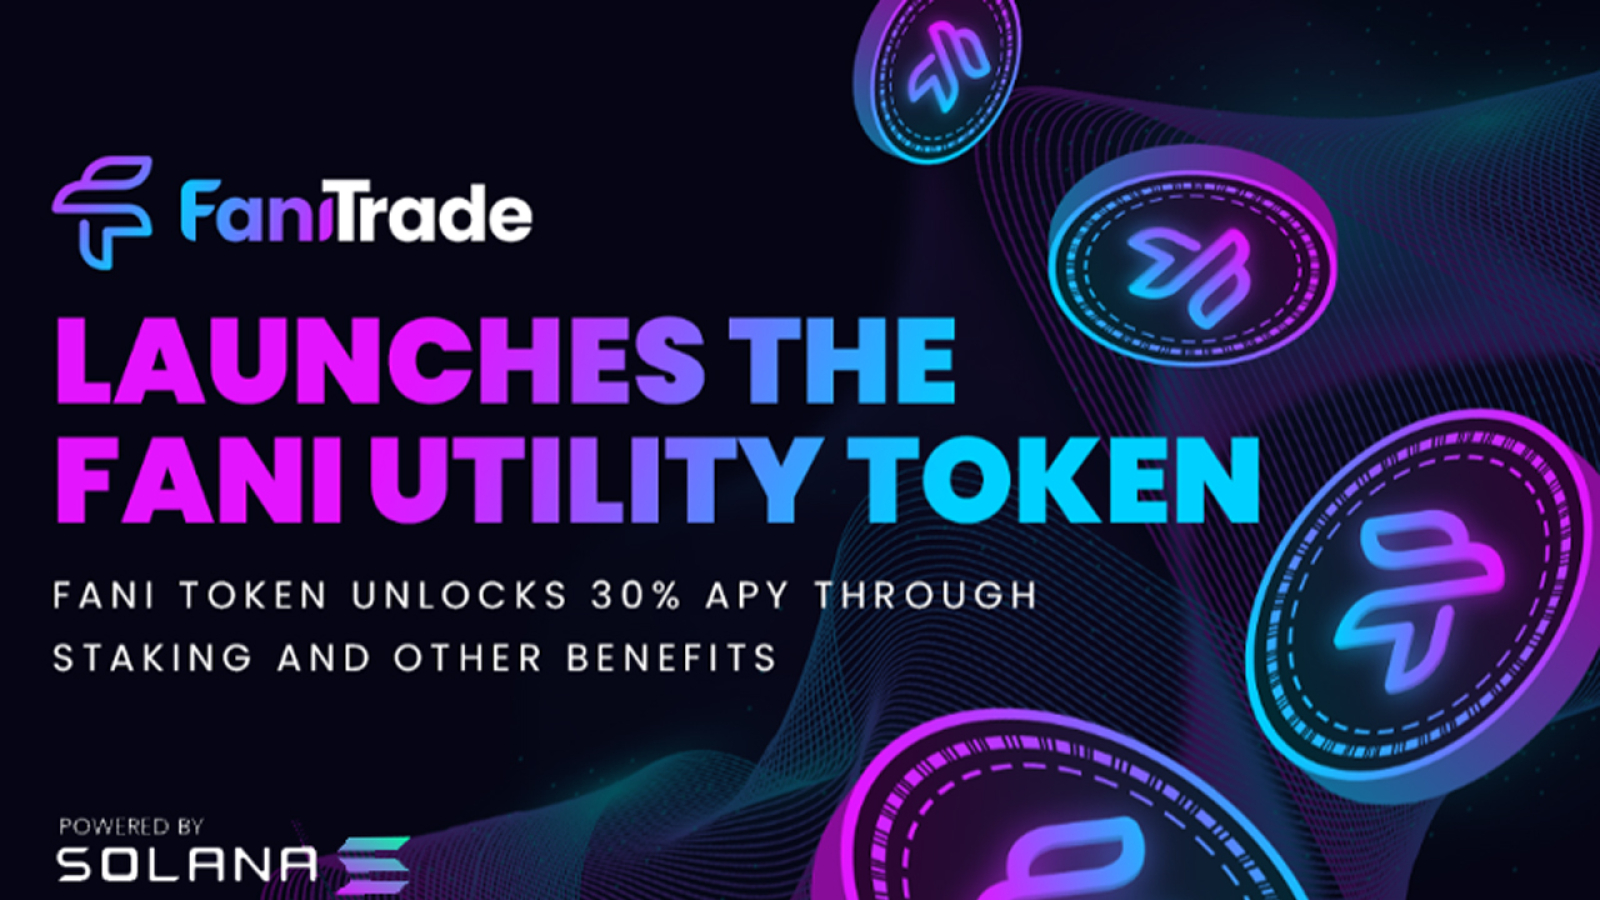 FaniTrade Launches The FANI Utility Token Which Unlocks 30% APY Through Staking And Other Benefits